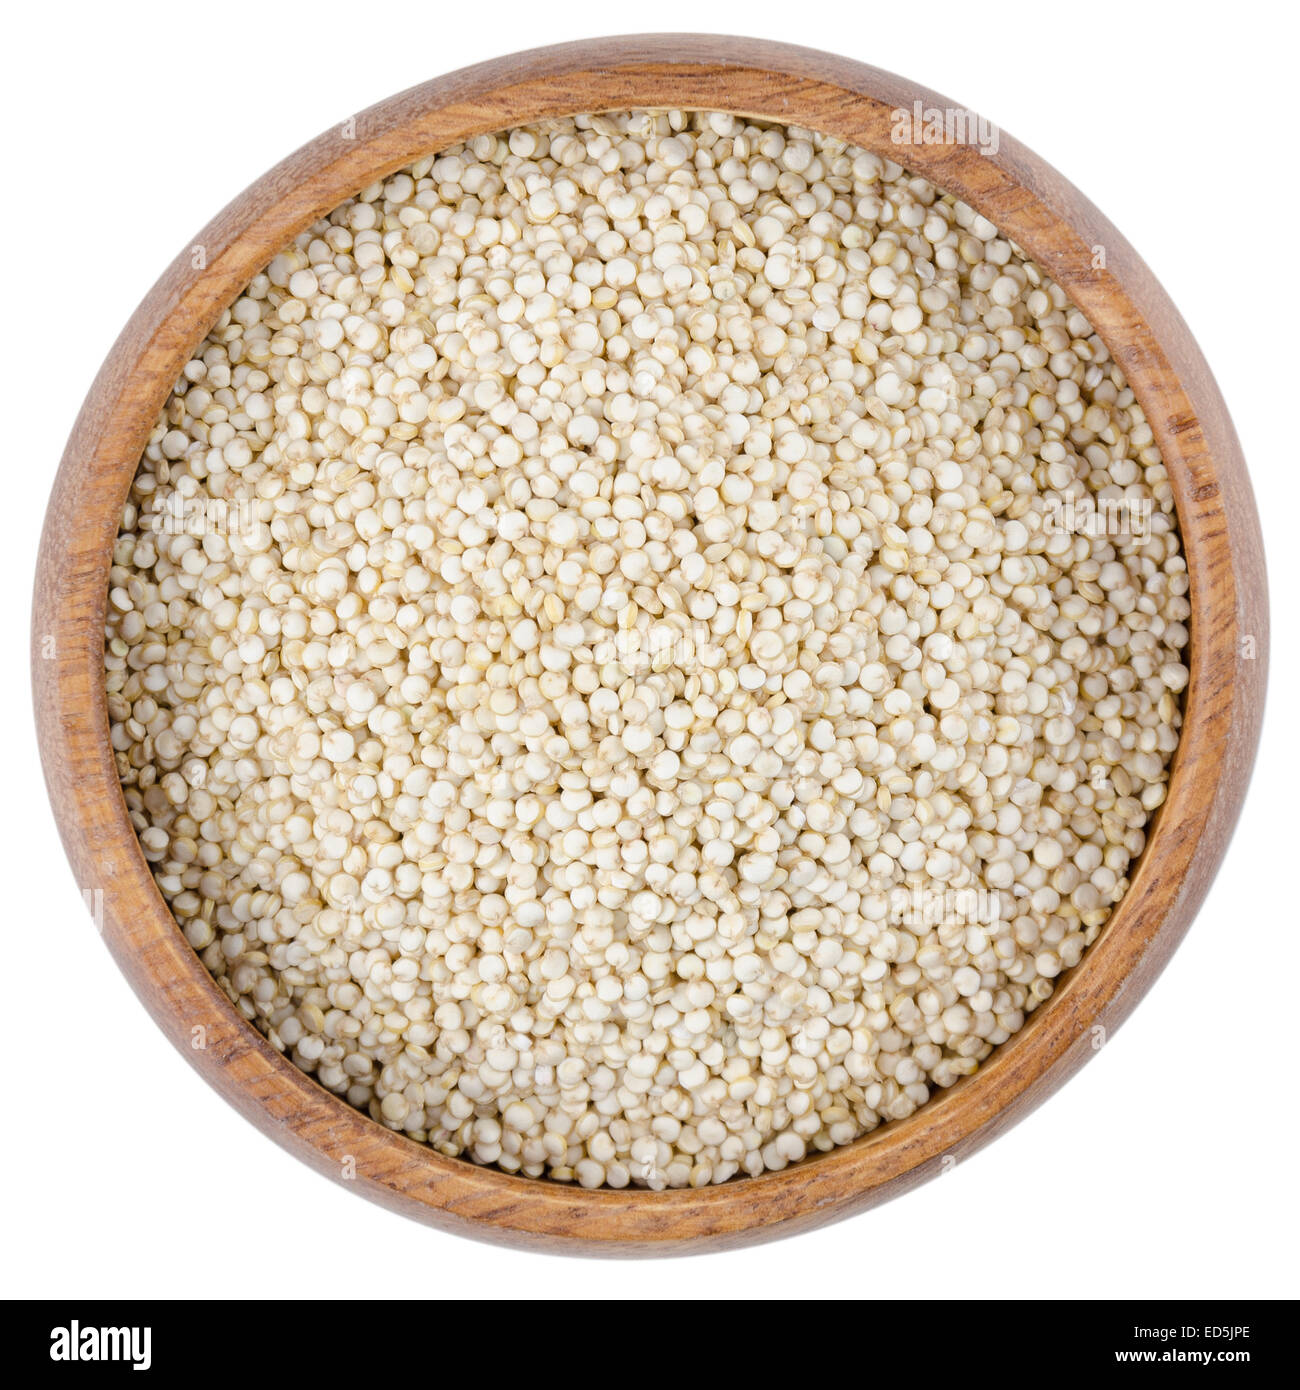 Quinoa Seeds in a Bowl. Raw quinoa seeds in a wooden bowl from above, isolated on white background. Stock Photo